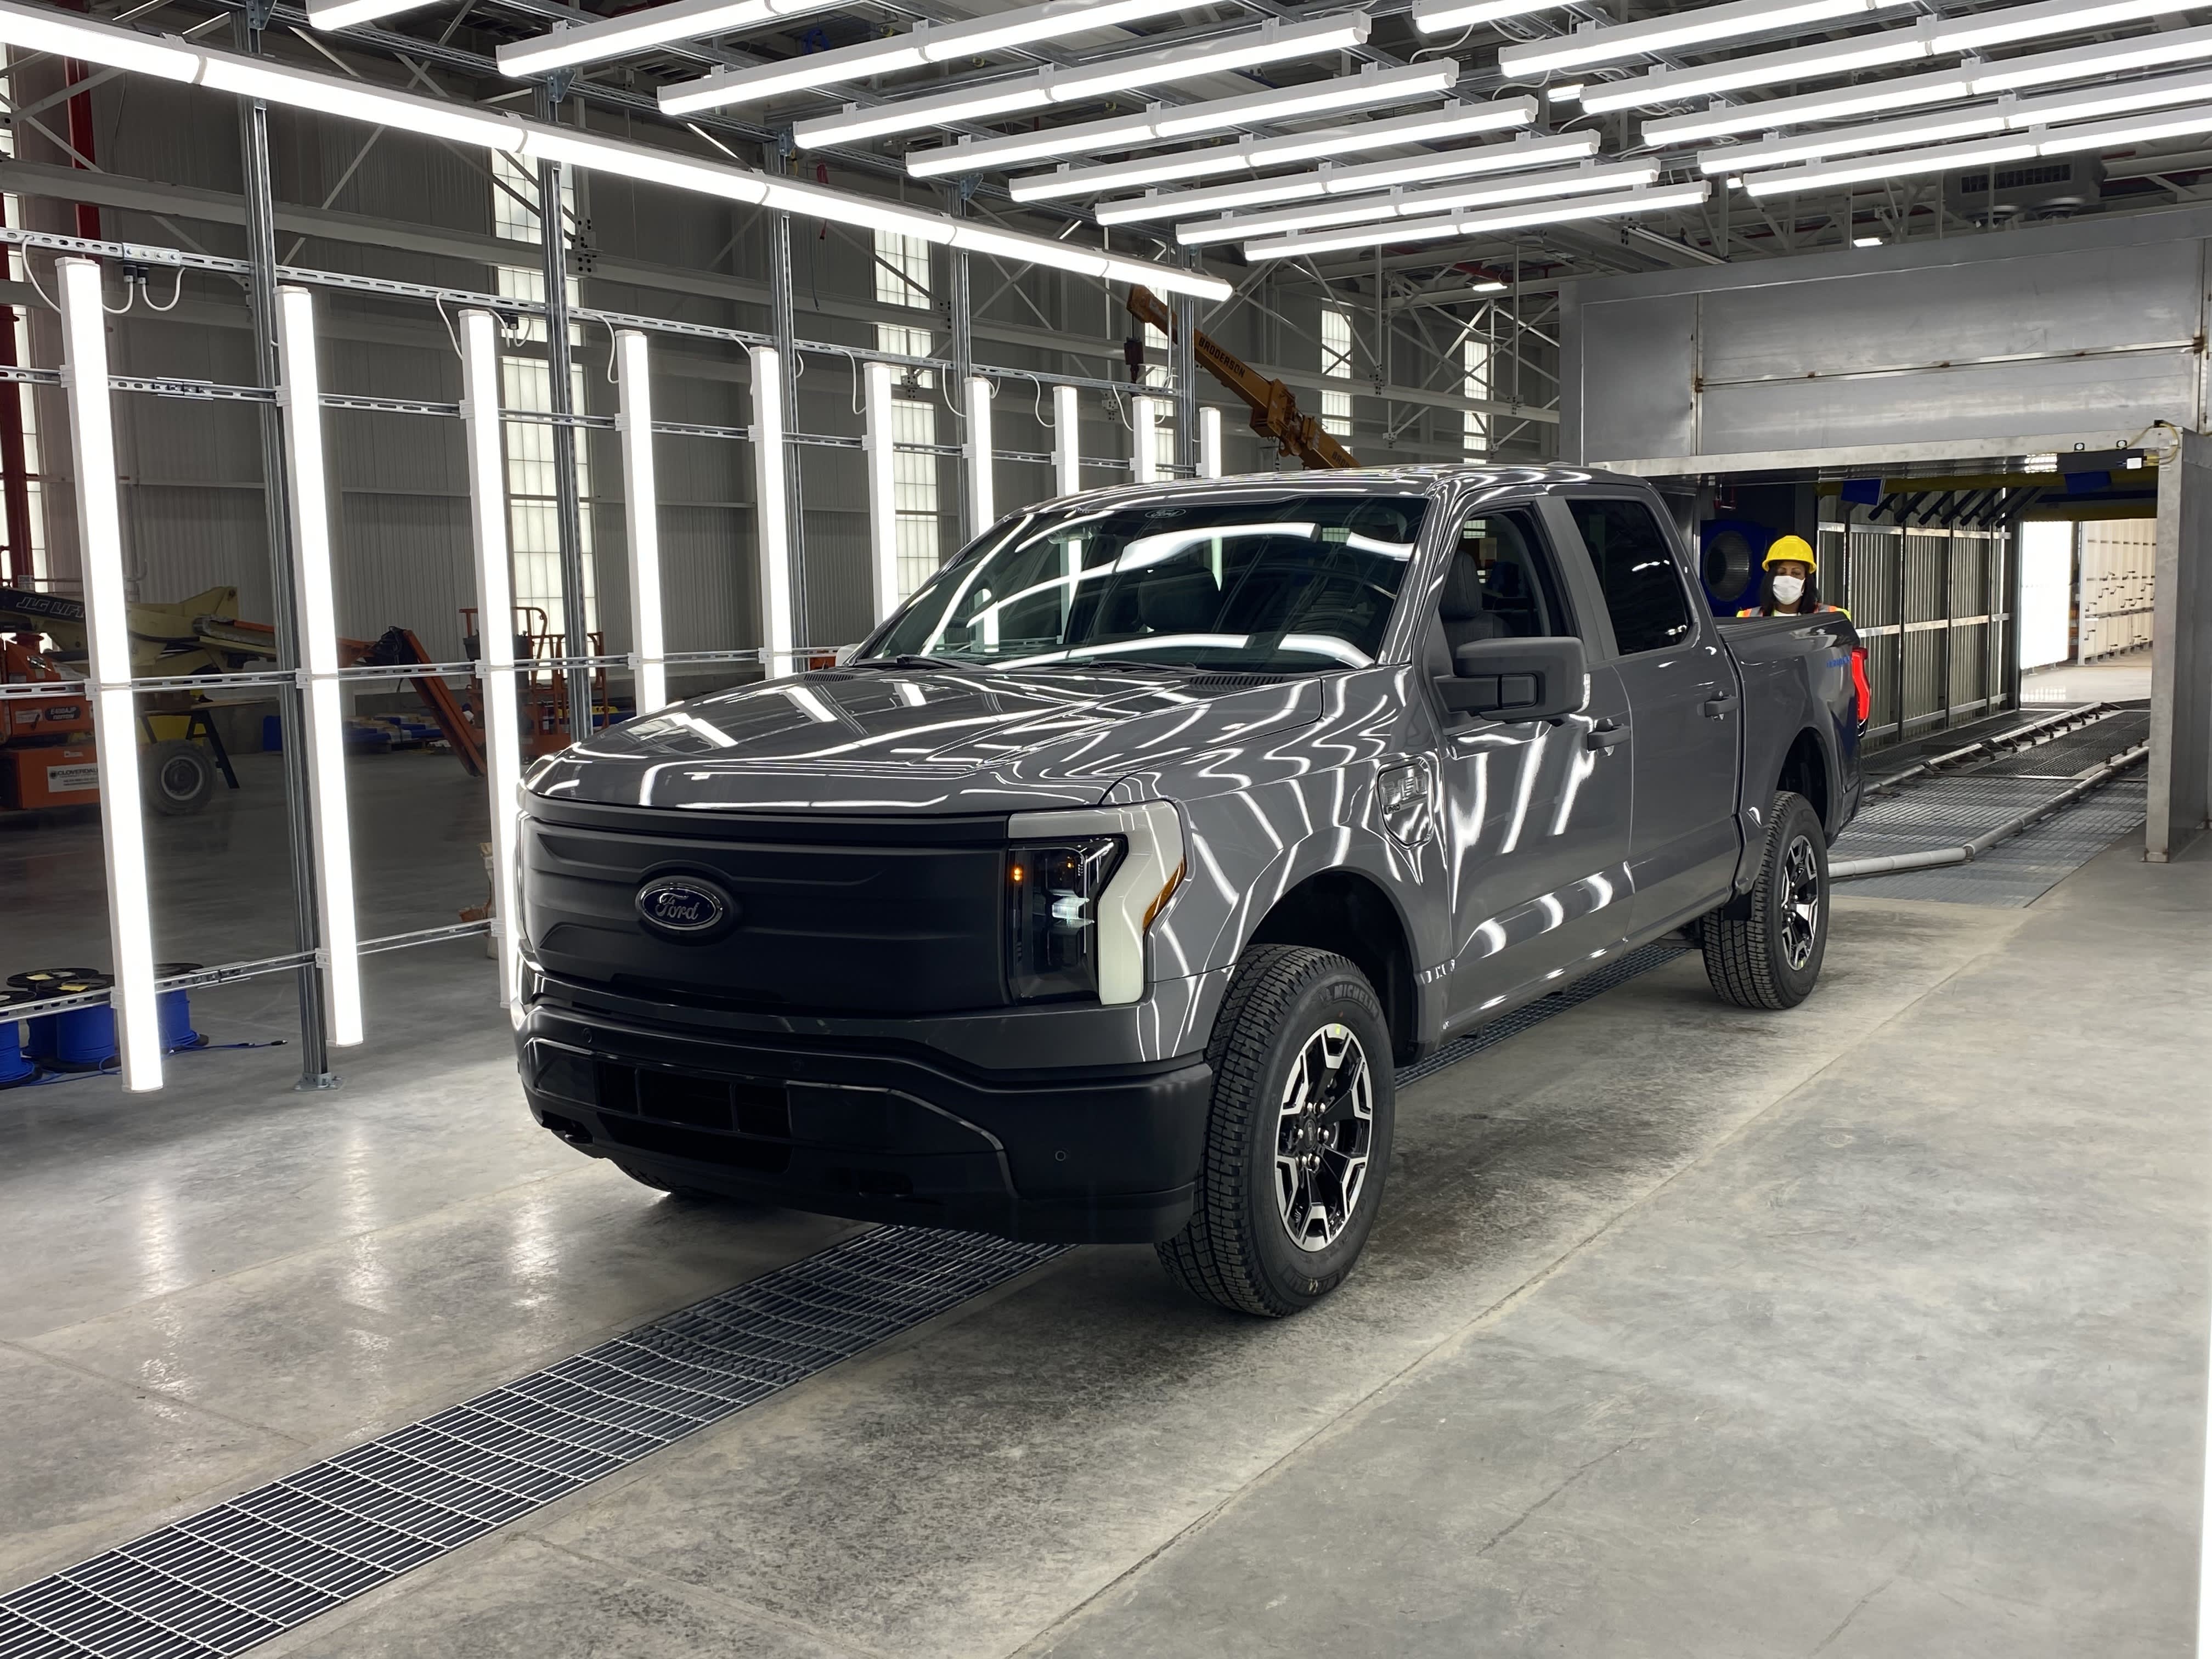 Ford adds jobs to increase production of electric F-150 pickup; reservations top 150,000